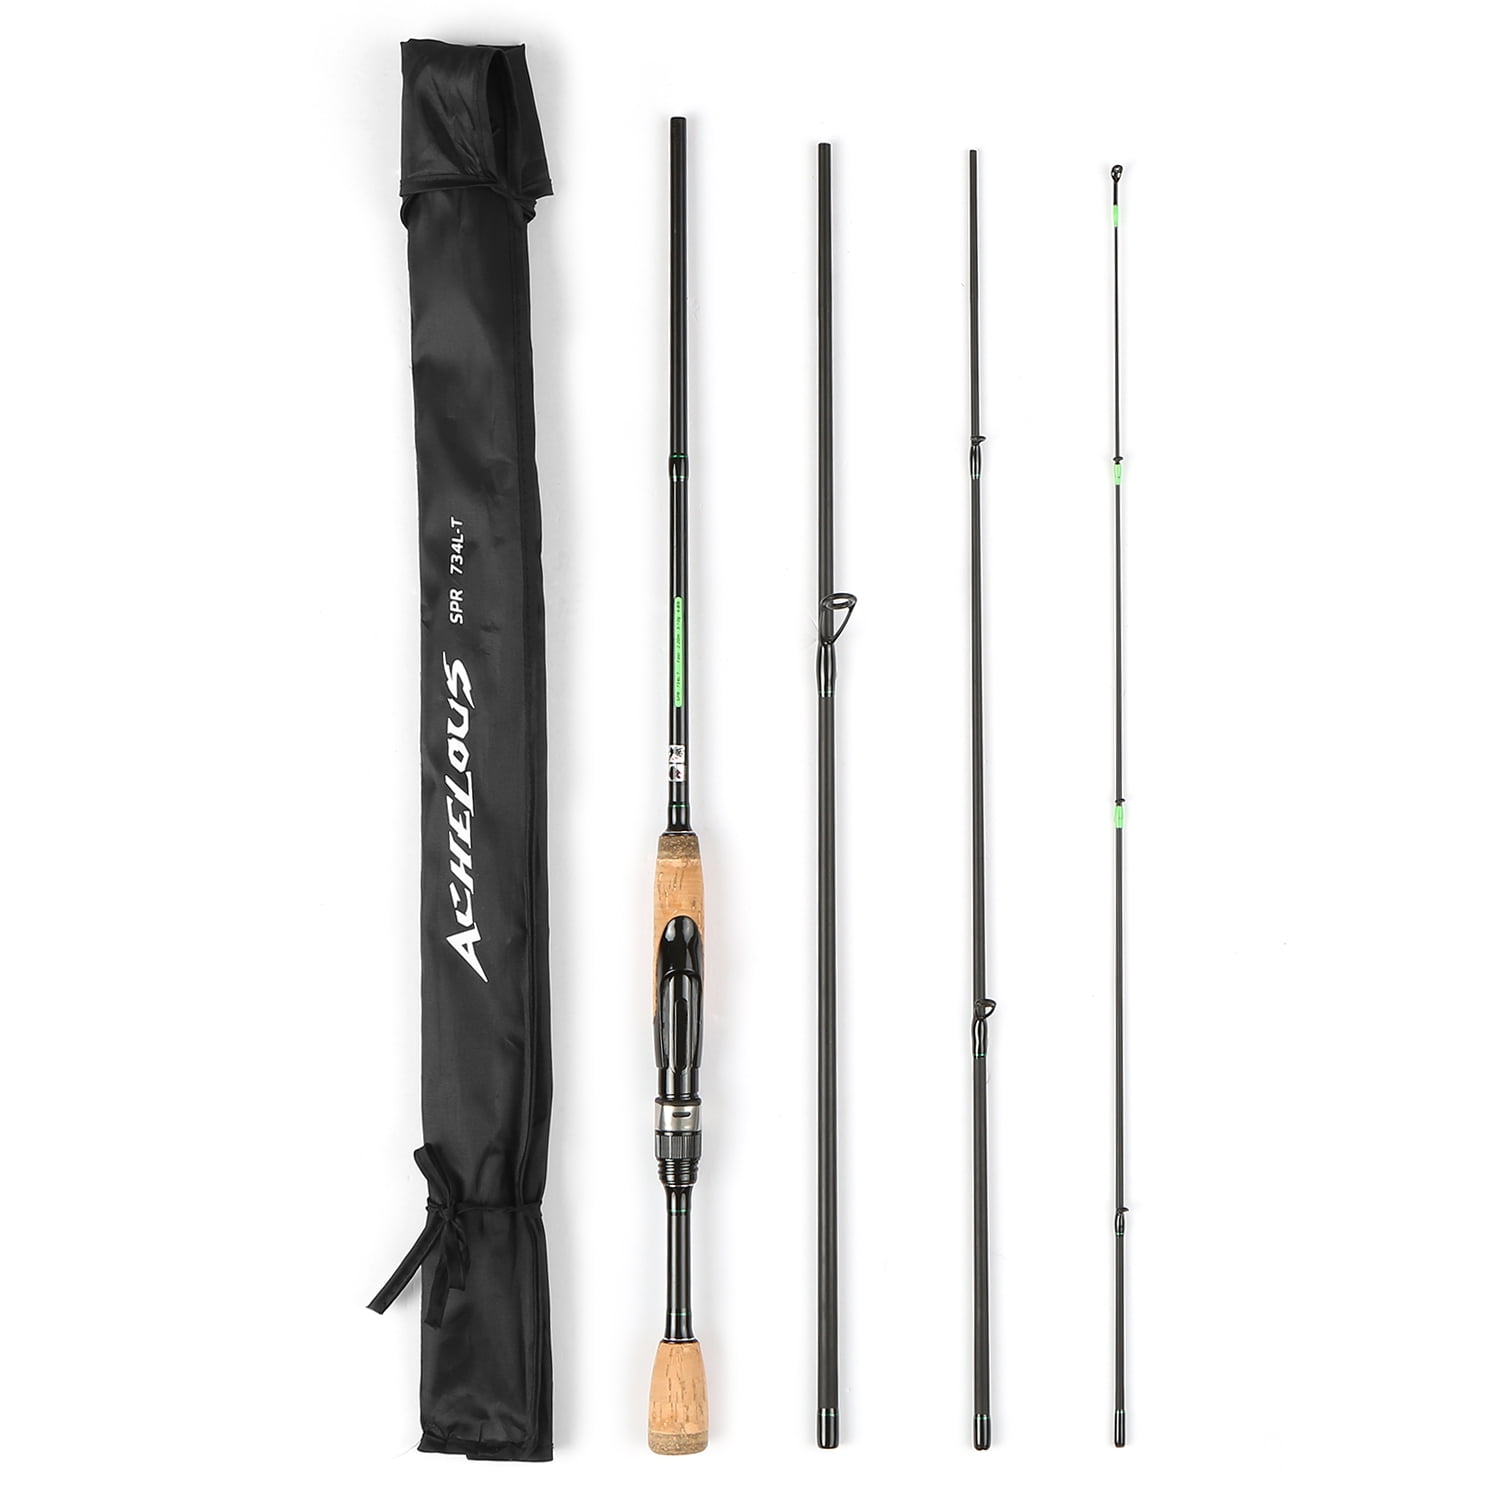 7' Details about   Durable & Sensitive Medium Fishing Rod w/ Cork Handle & Spinning Reel Combo 